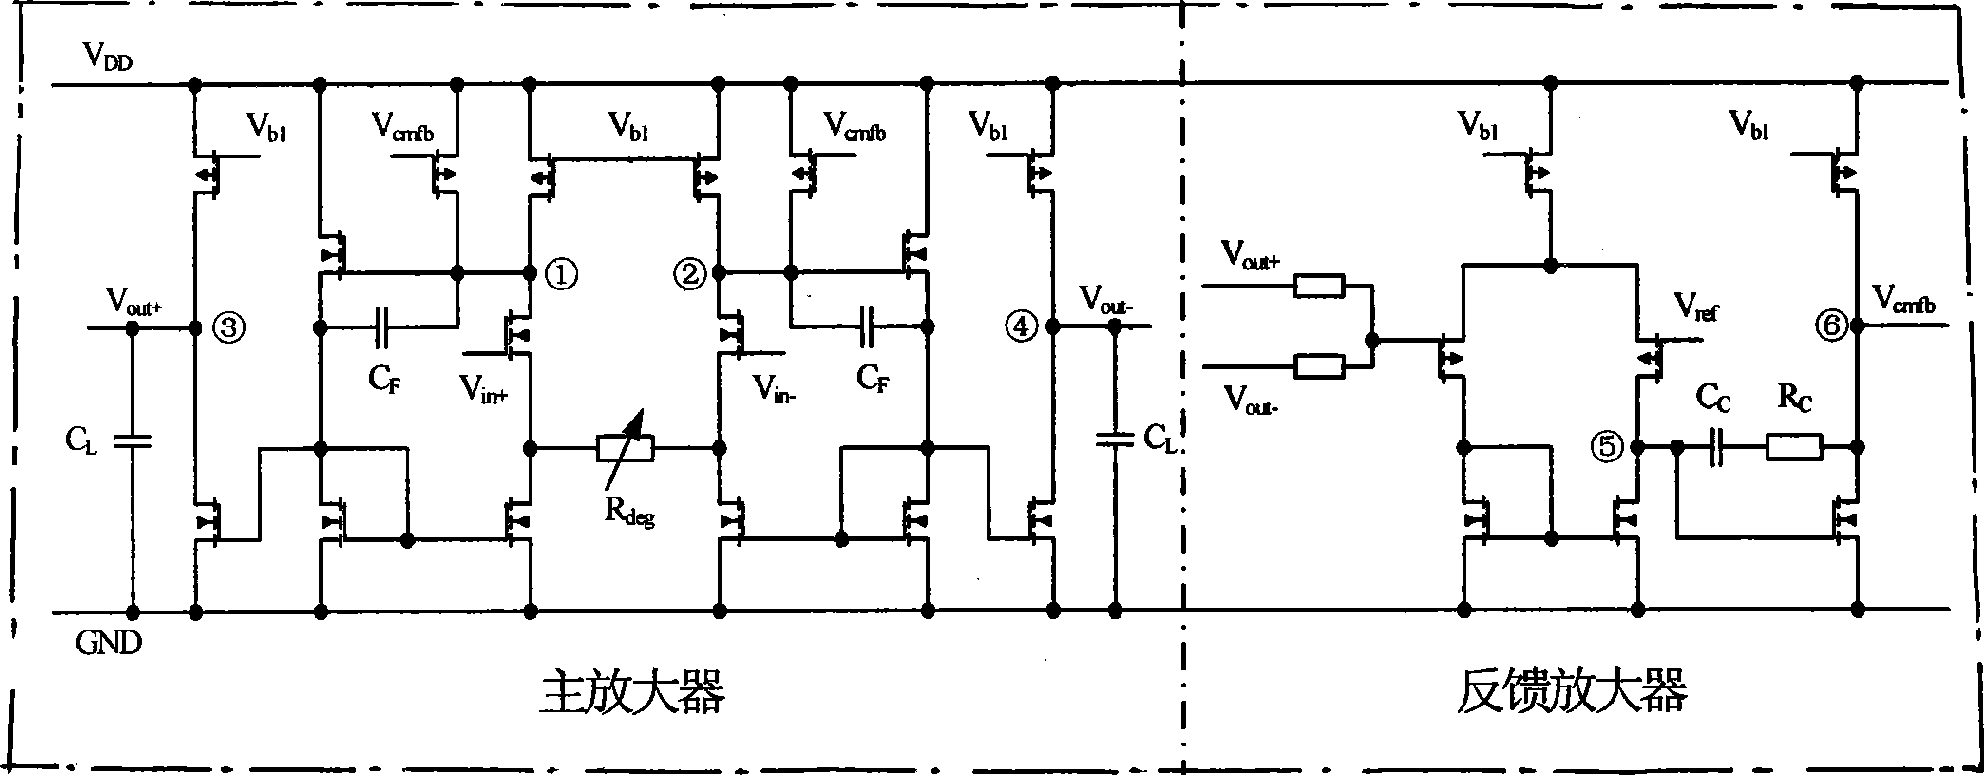 Method for compensating common mode feedback circuit frequency of two-stage amplifier